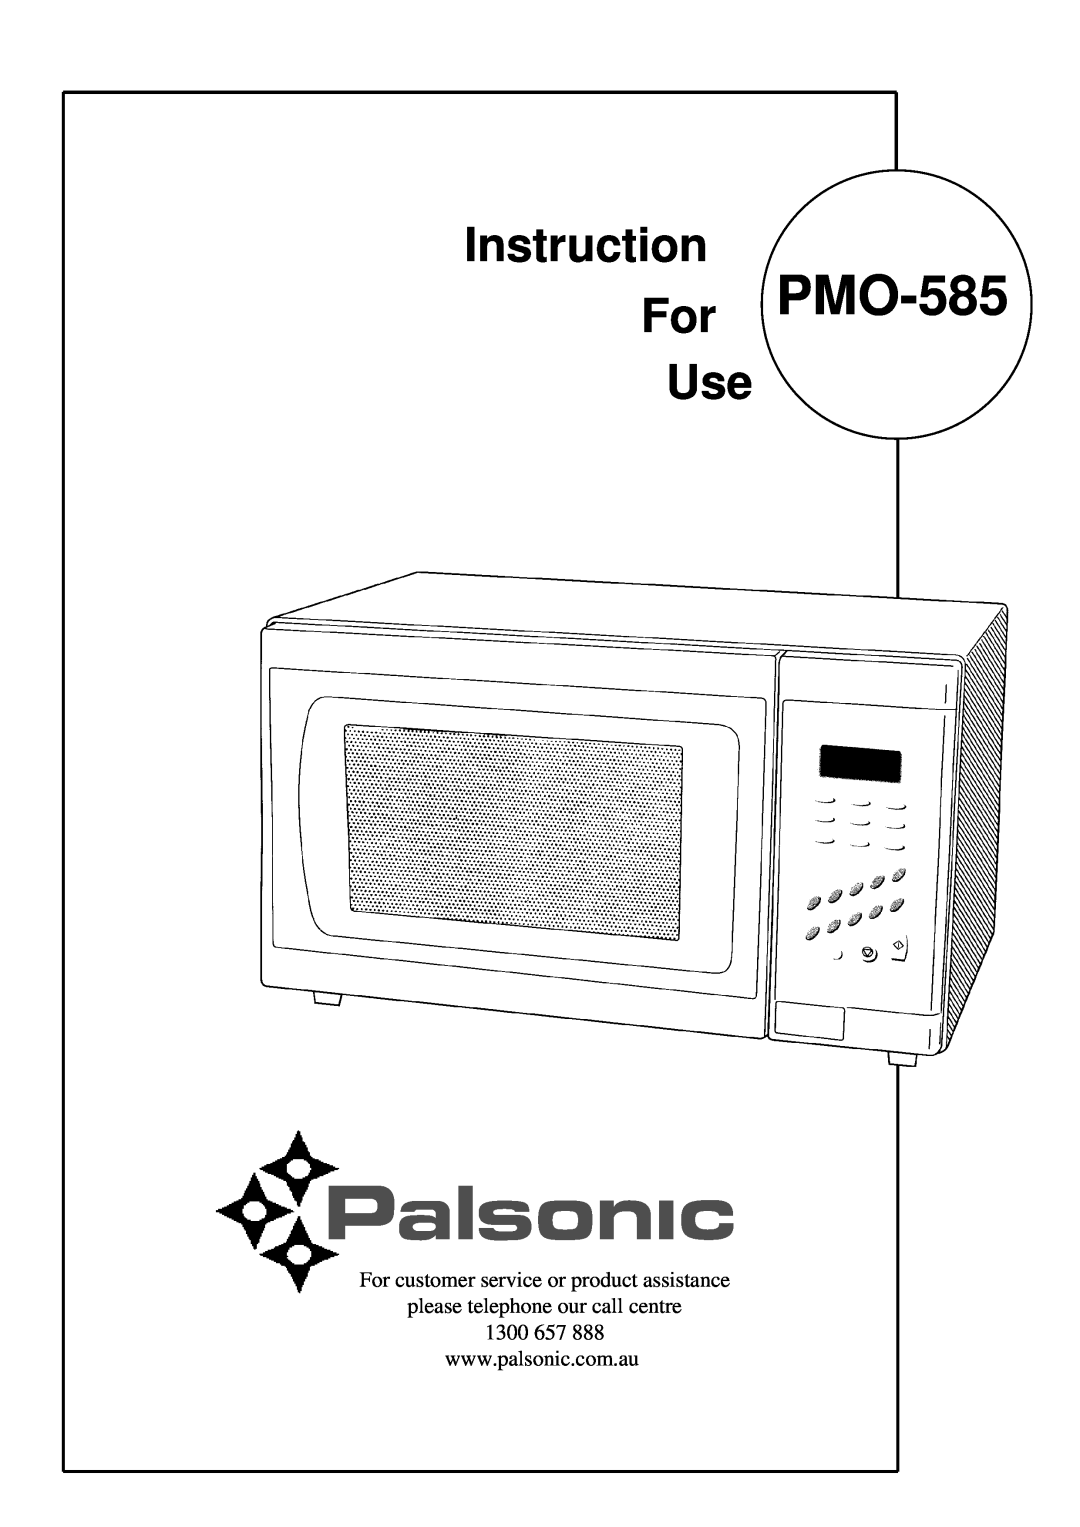 Palsonic manual For customer service or product assistance, please telephone our call centre, For PMO-585, Instruction 